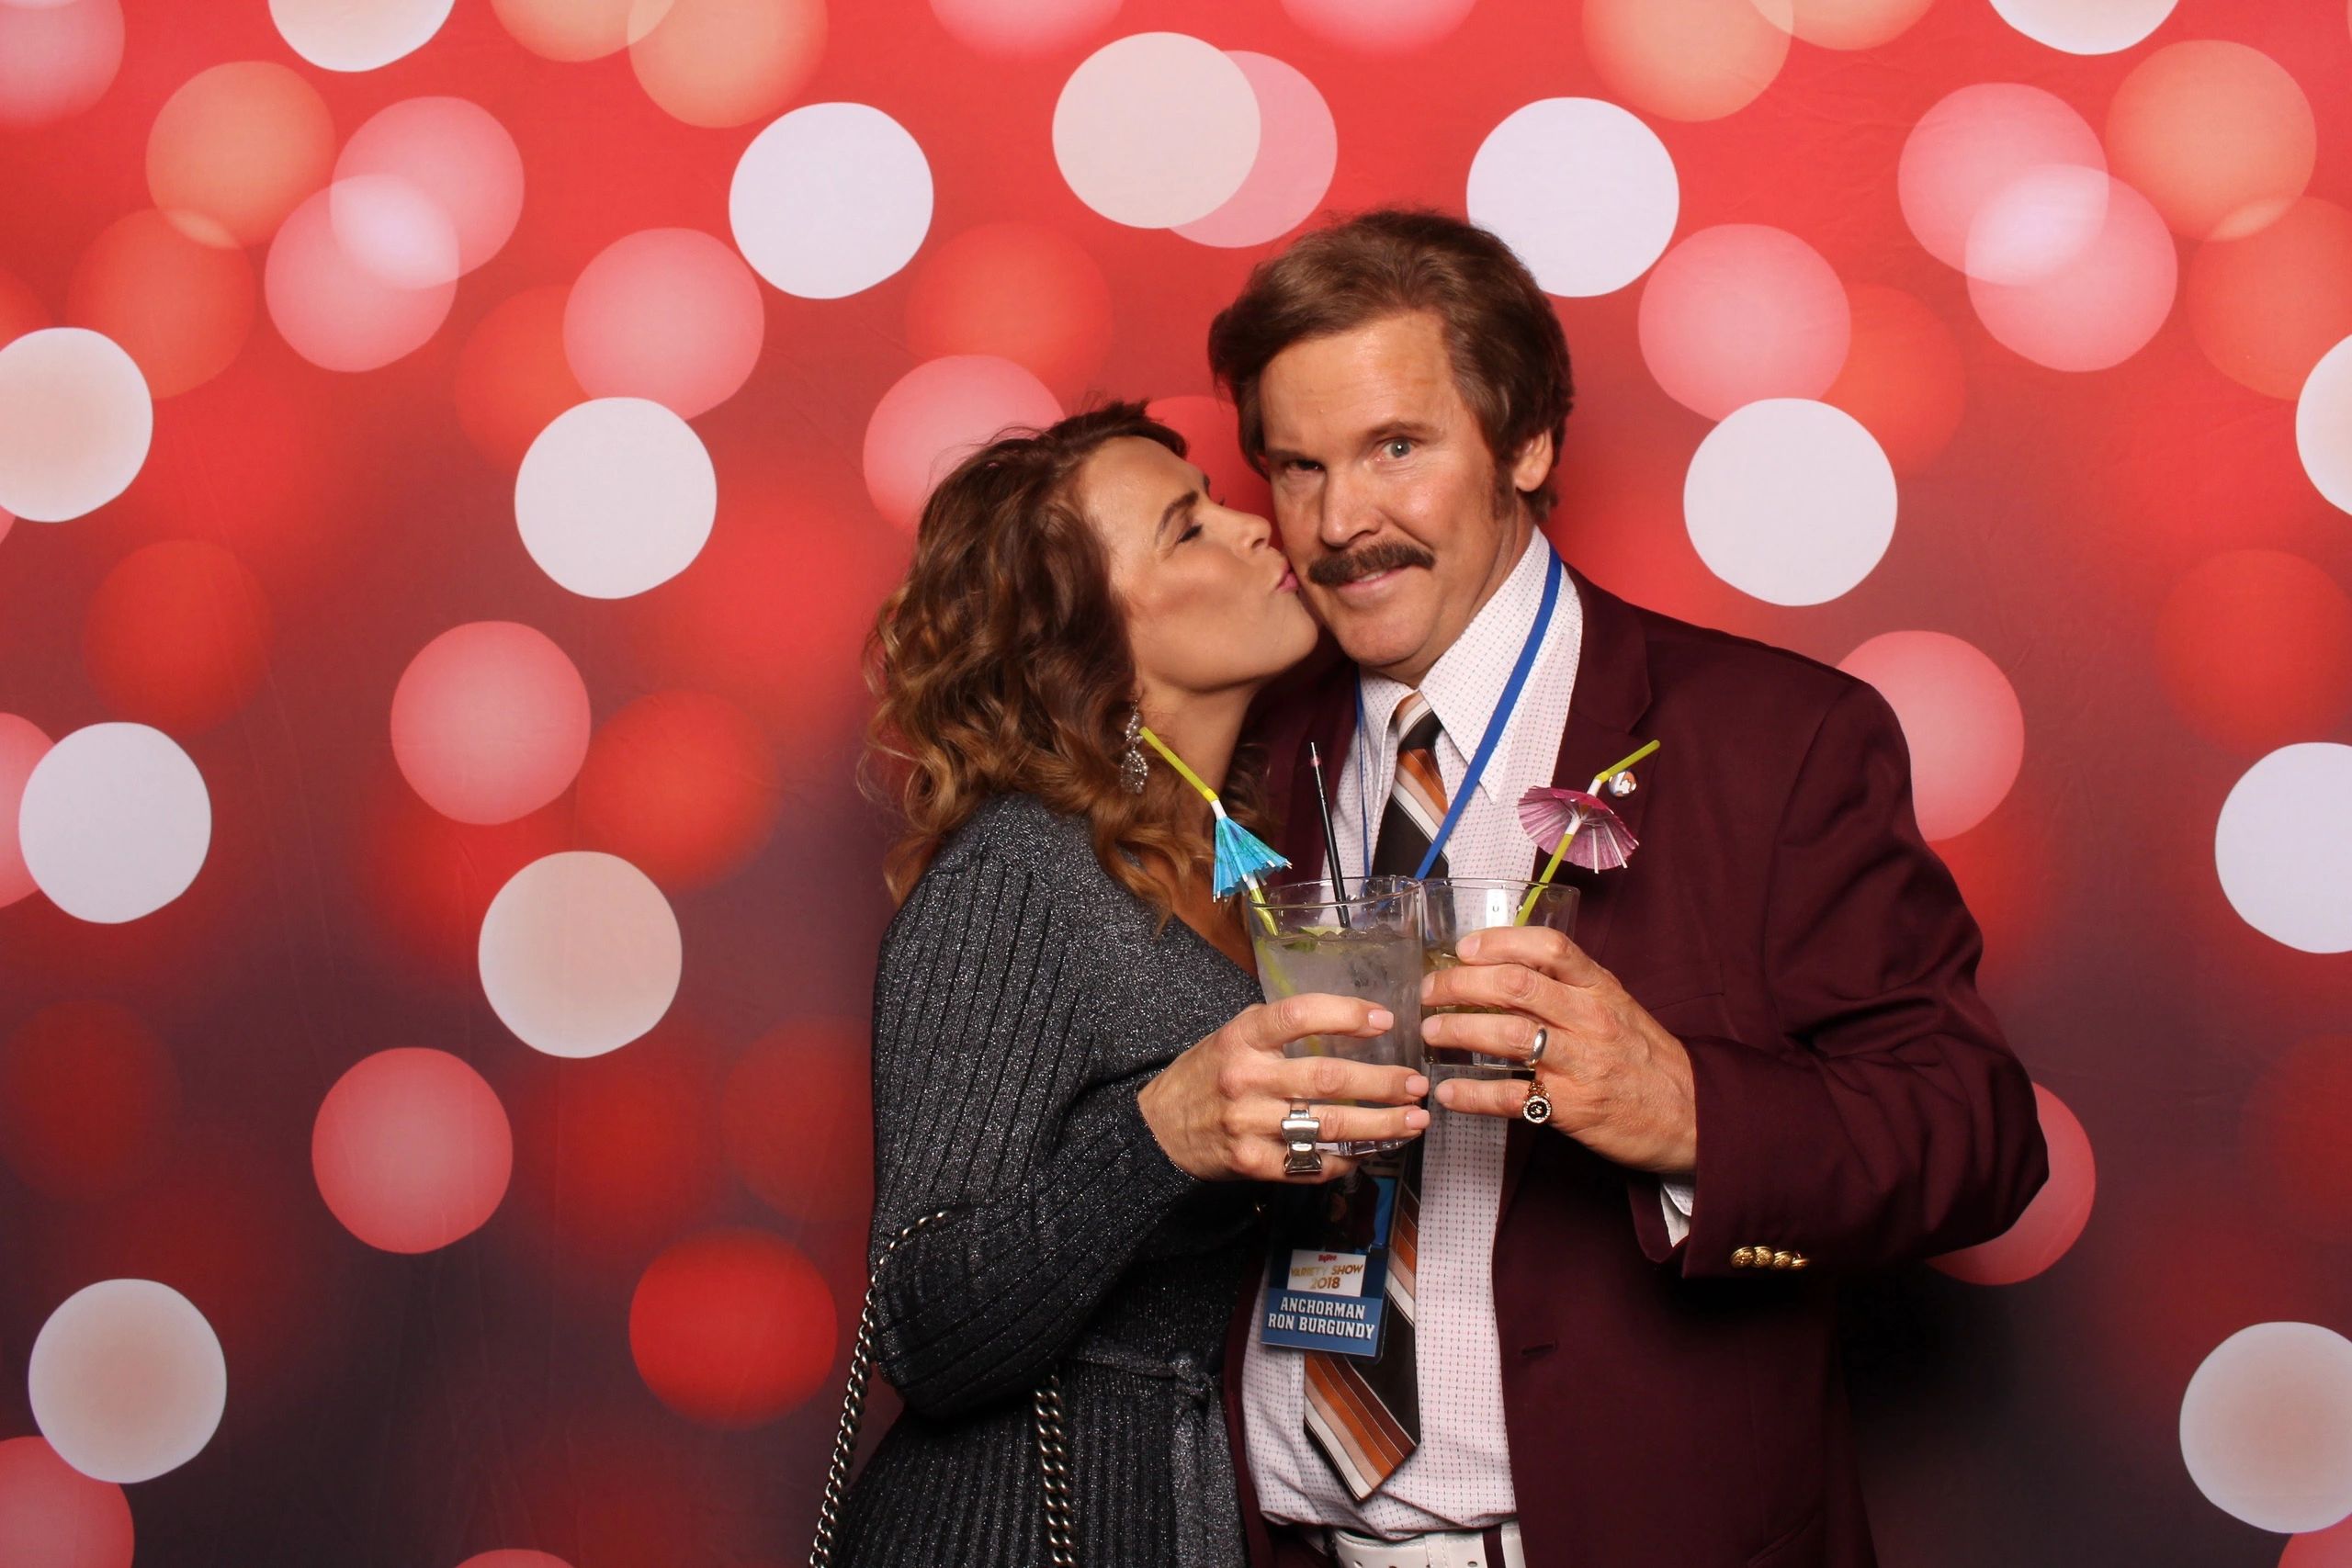 Hire entertainer Anchorman Ron Burgundy lookalike for massive ROI for trade show appearances.